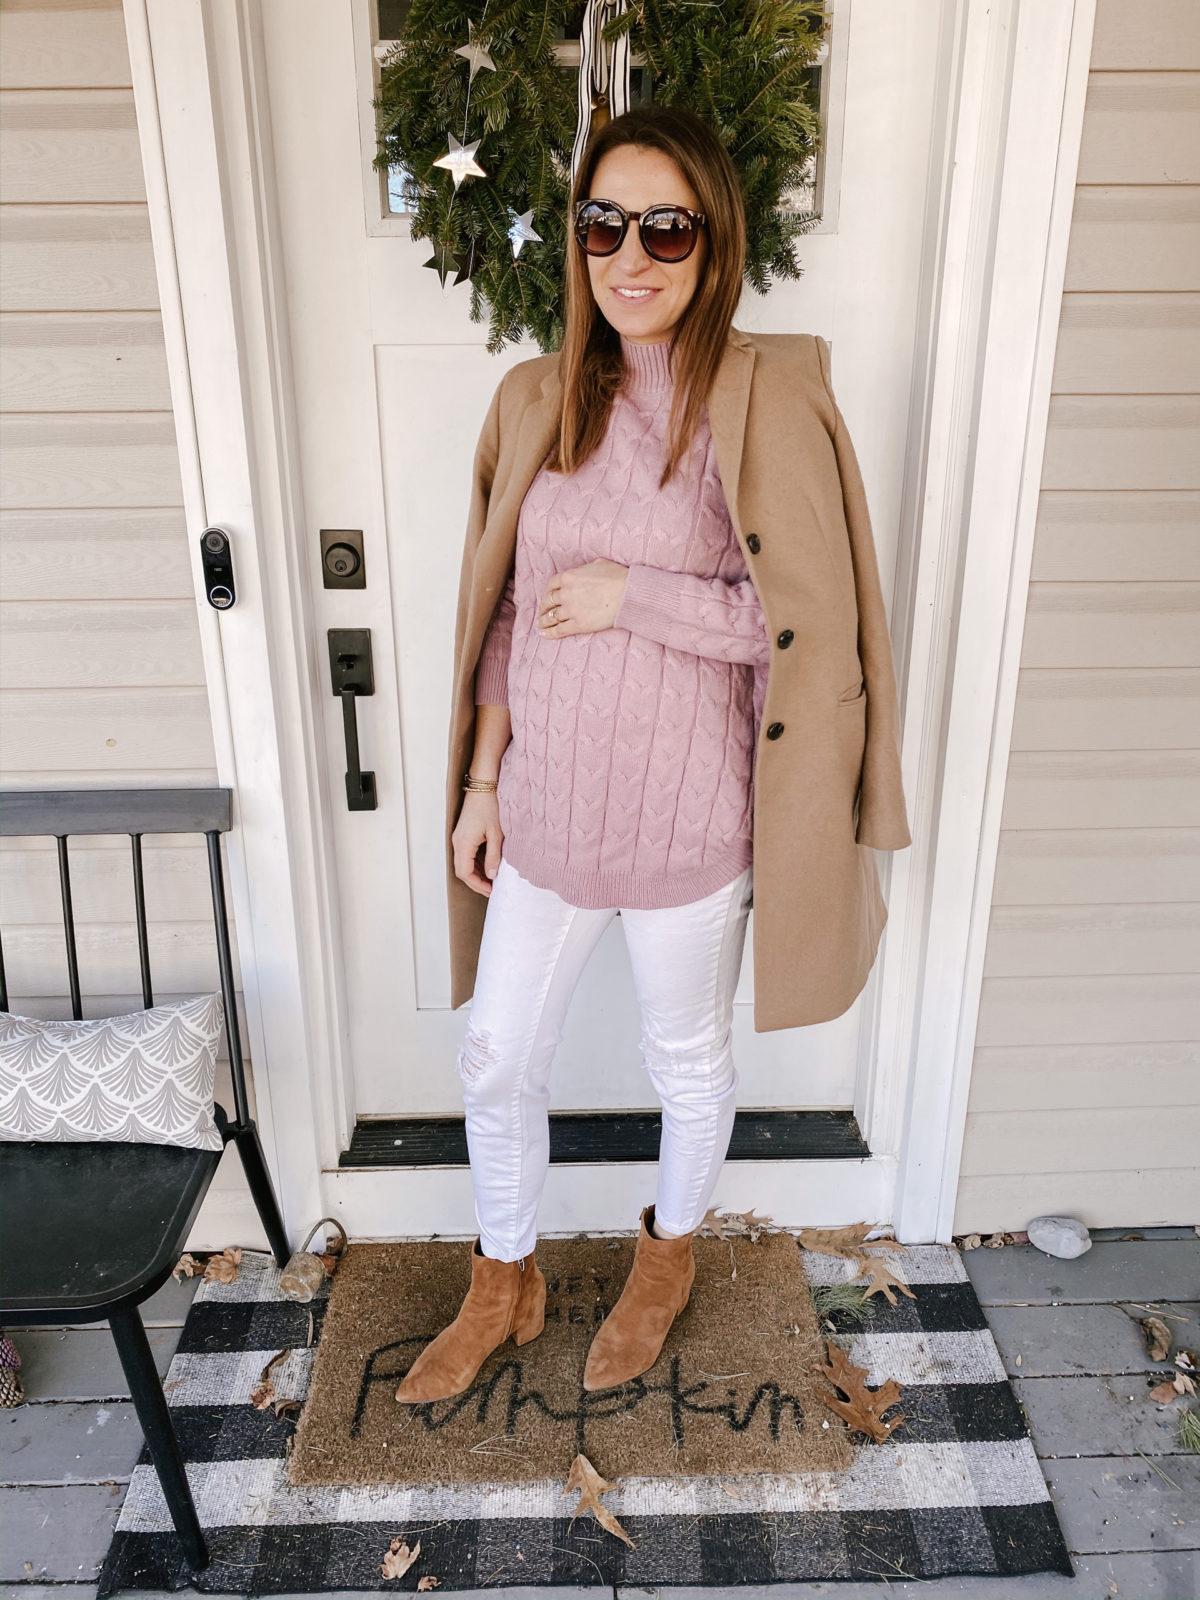 Maternity Outfit Ideas For Winter The Mama Notes